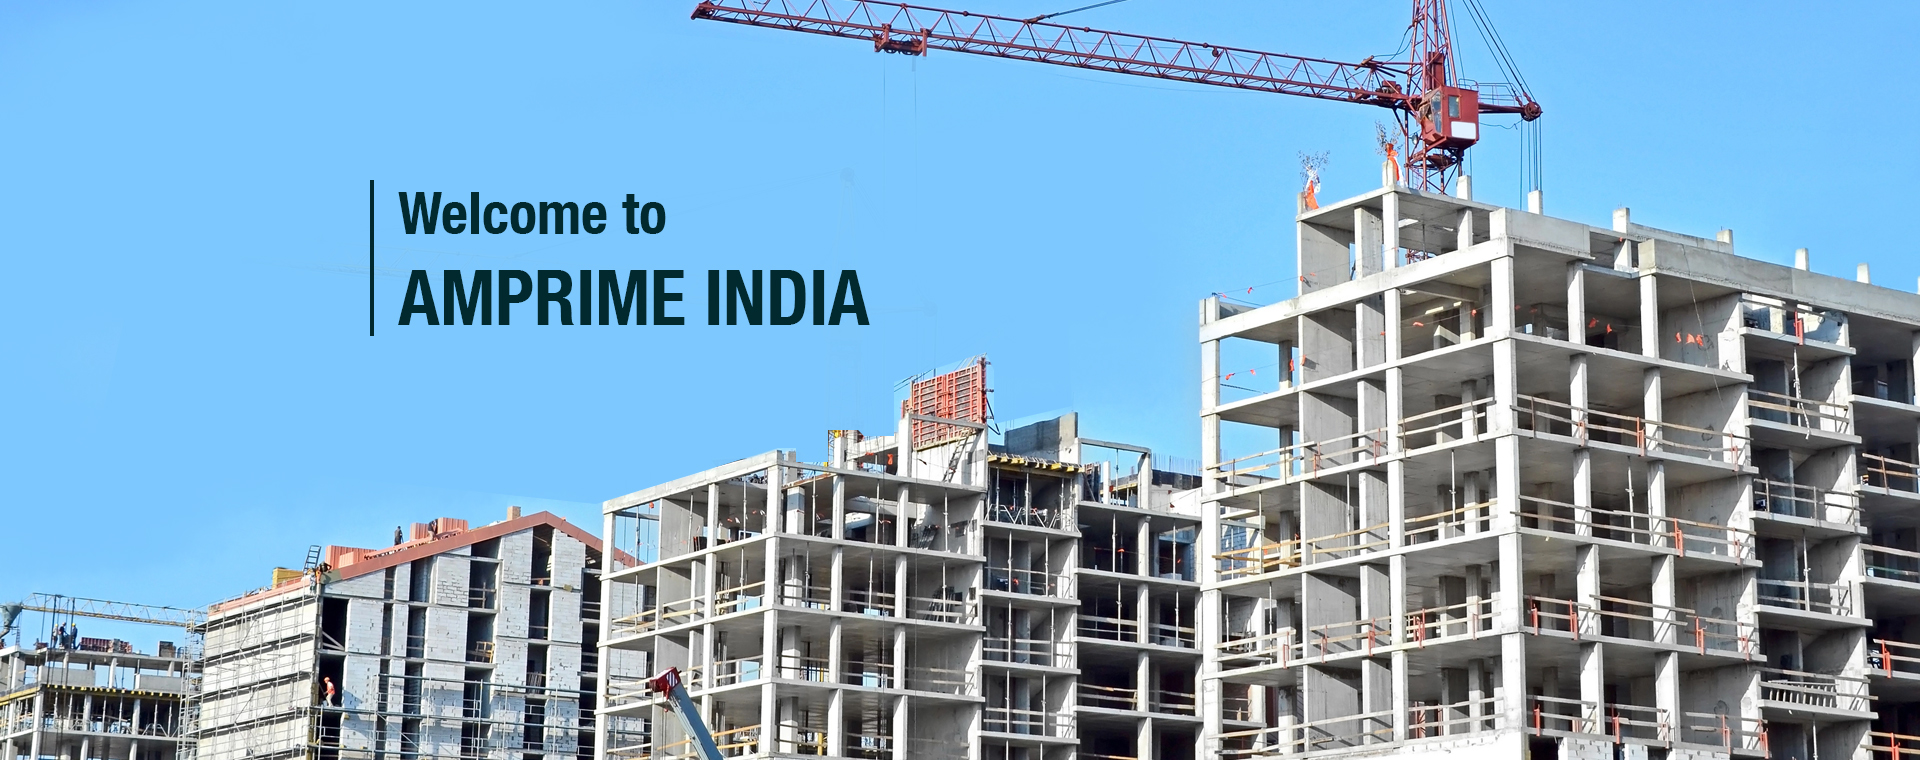 AMPRIME-INDIA-BEST-CONSTRUCTION-SOLUTIONS